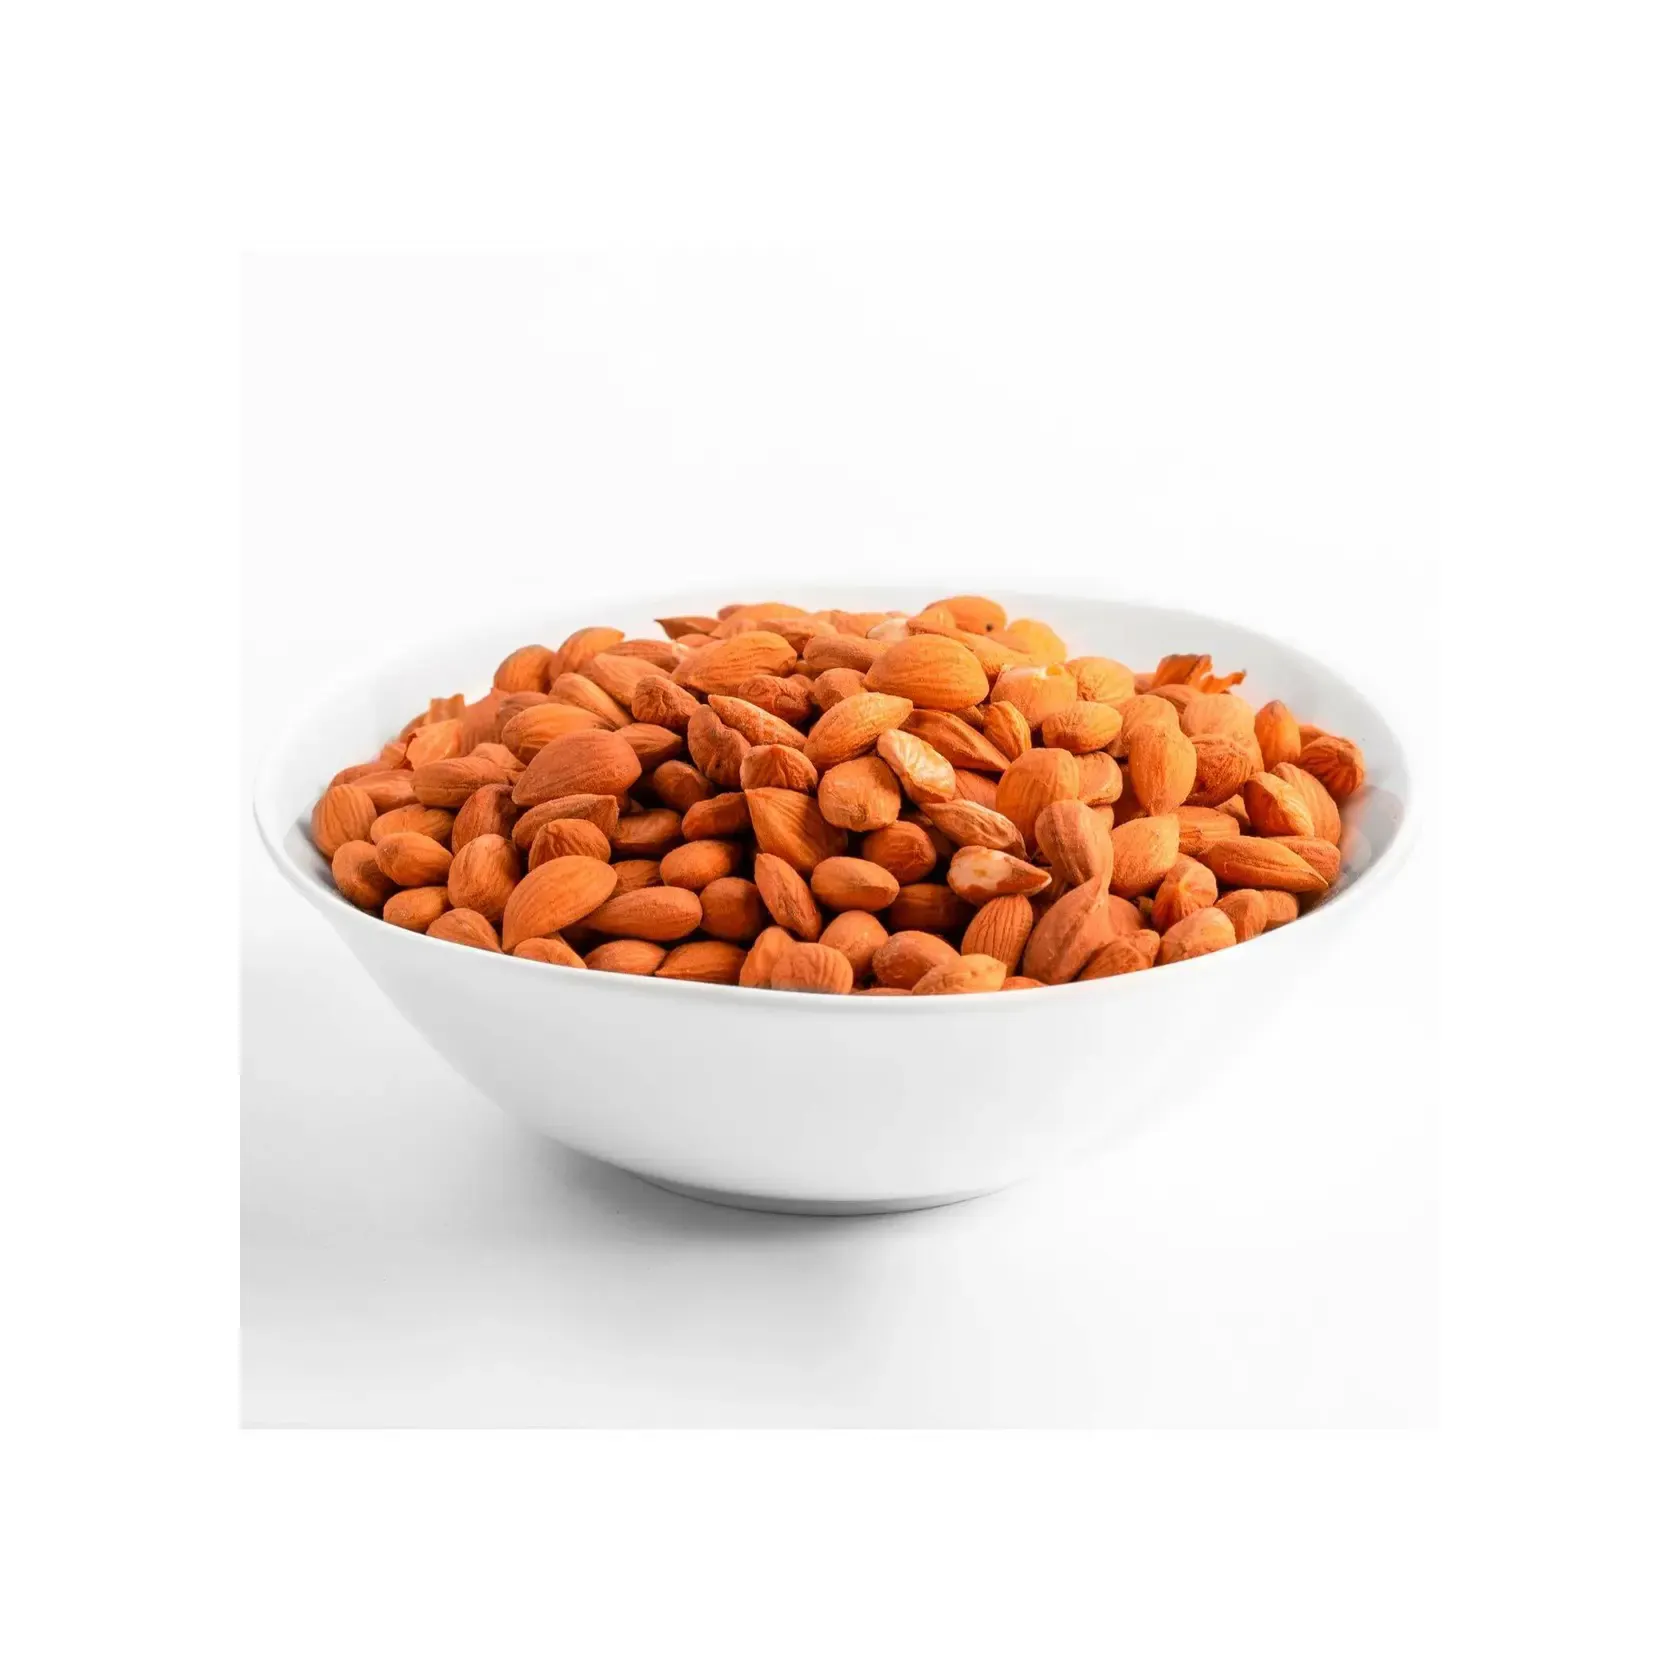 Sweet Taste Apricots Raw Soft Dried Natural Apricots Kernels available Soft Dried Vietnam Apricots Dried Fruit DRIED APRICOTS TU